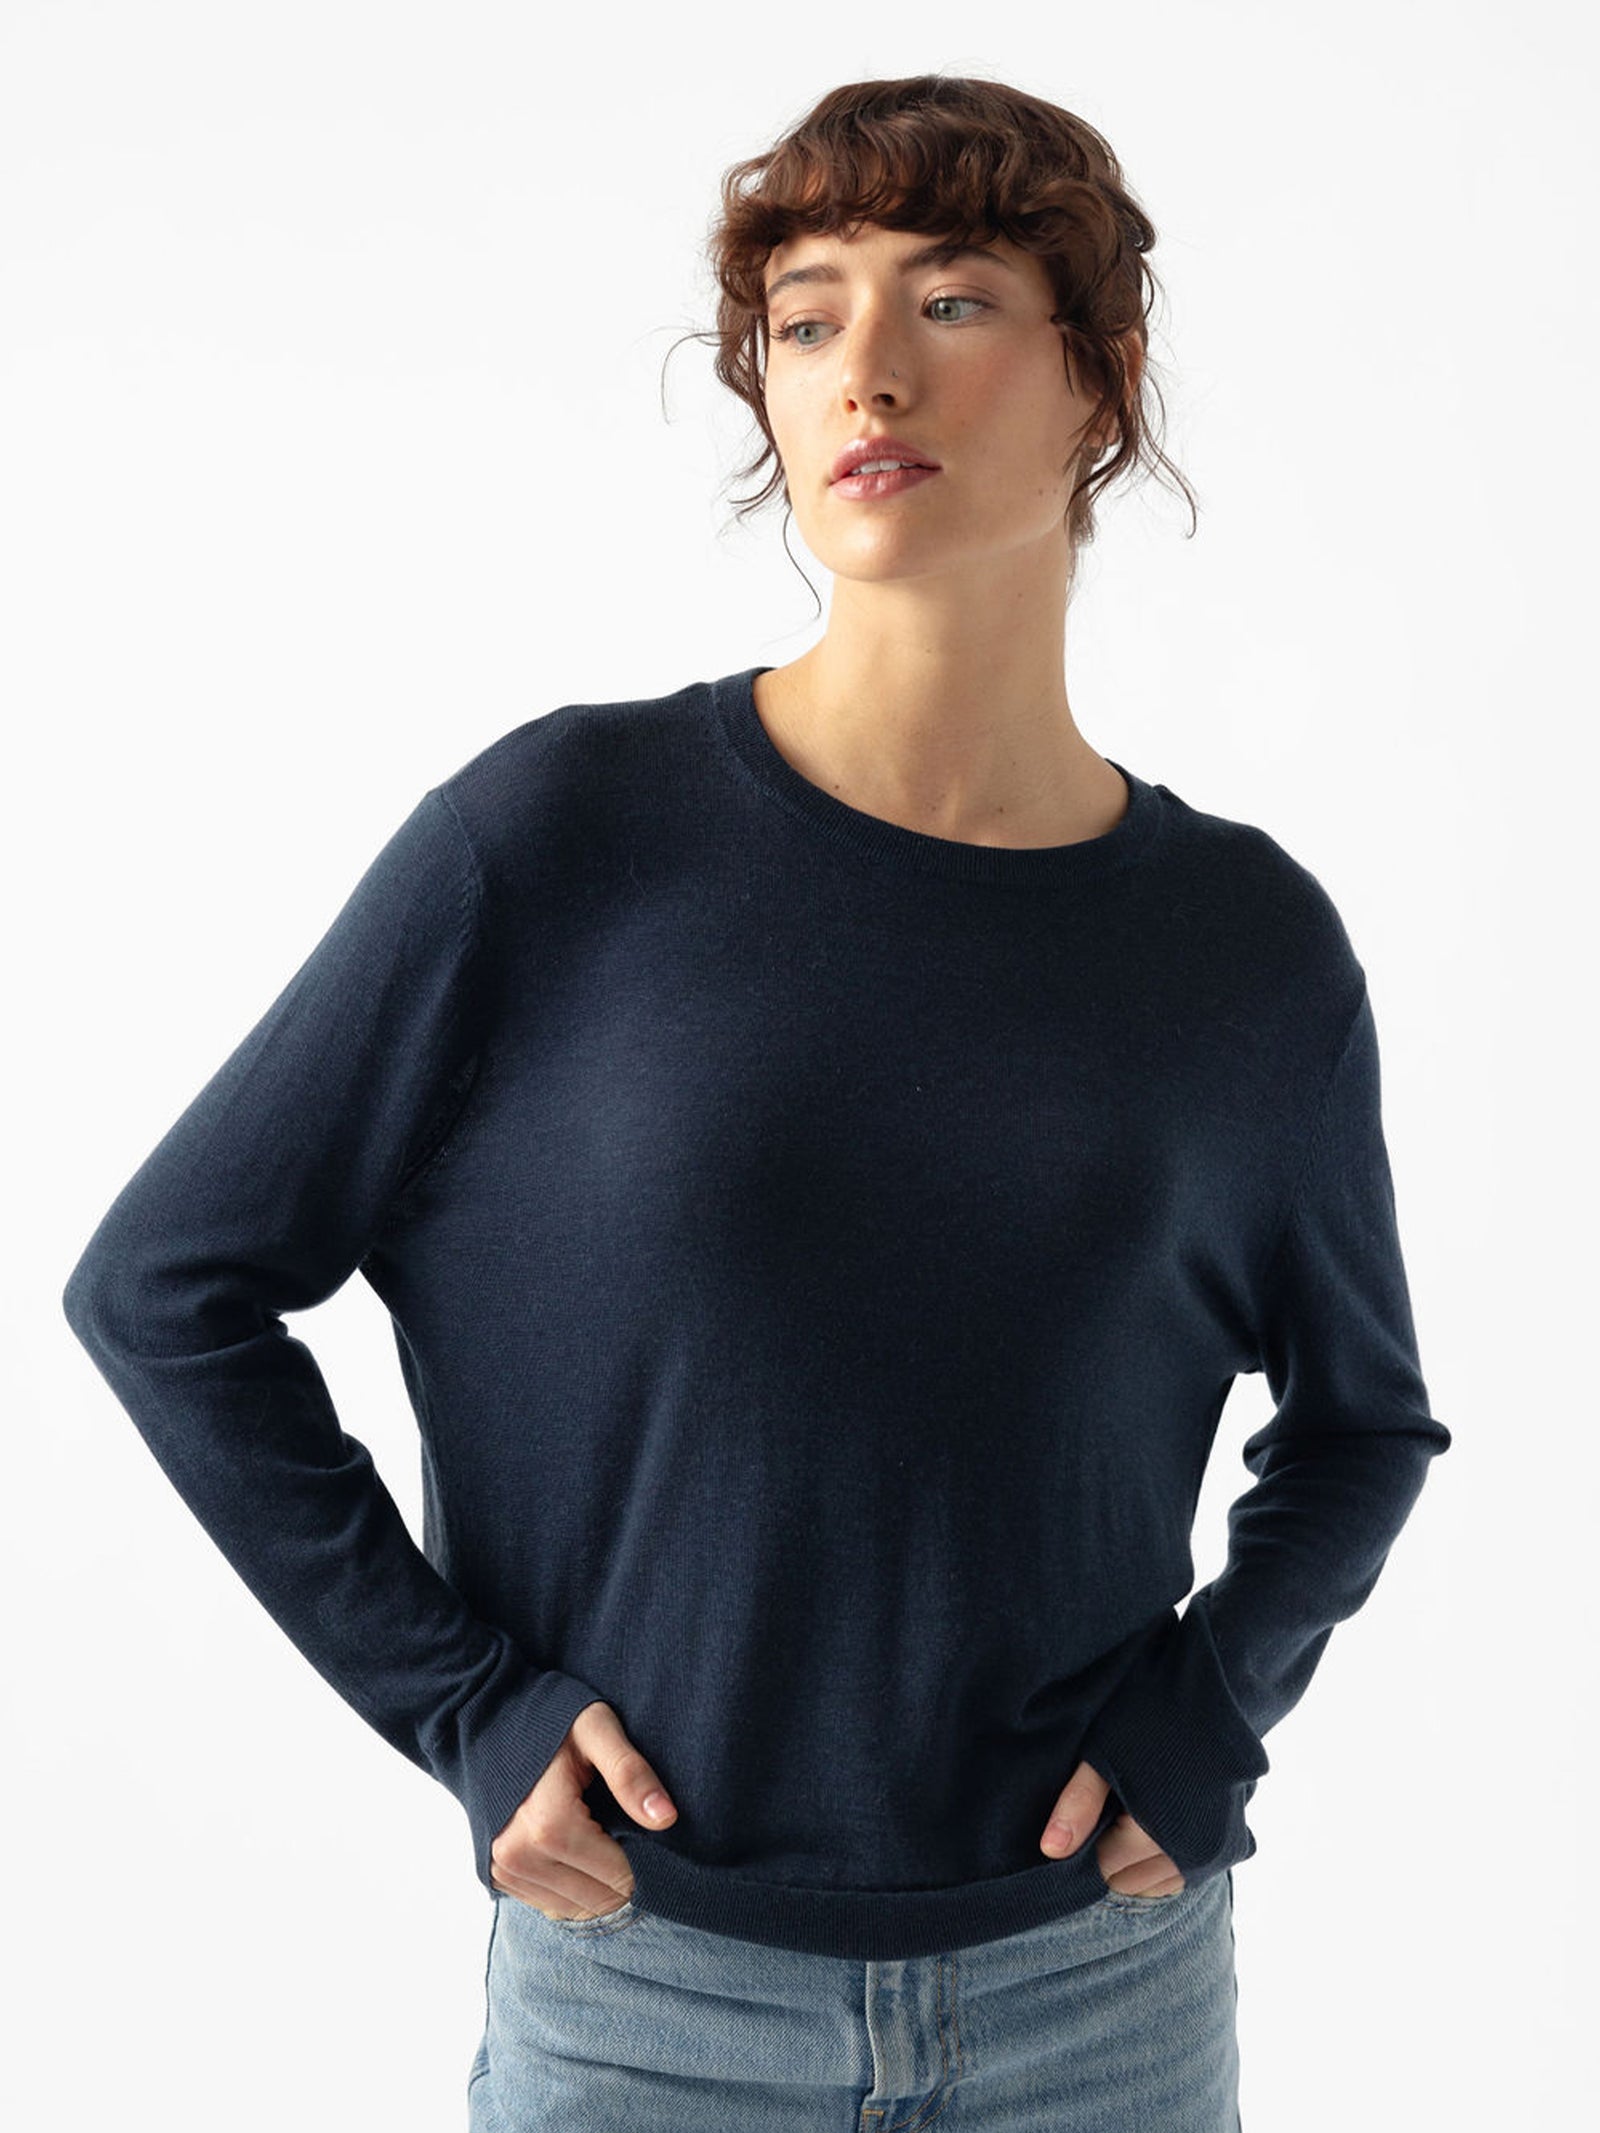 Woman with serious look wearing jeans and an eclipse airknit sweater with white background 